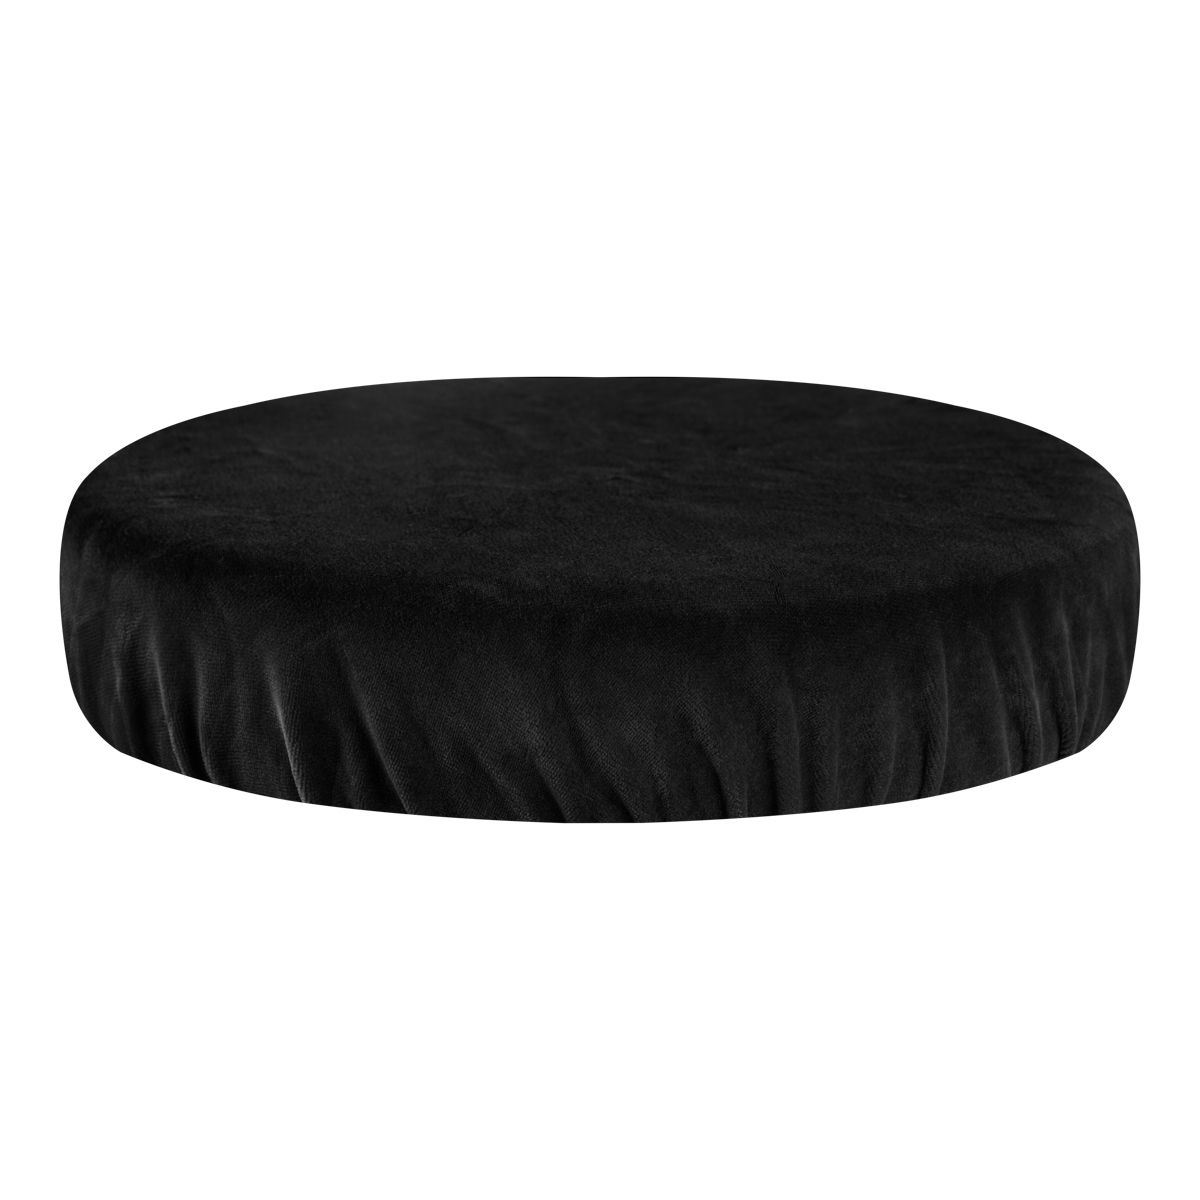 Stool seat cover velvet black -  0141213 SINGLE USE PRODUCTS